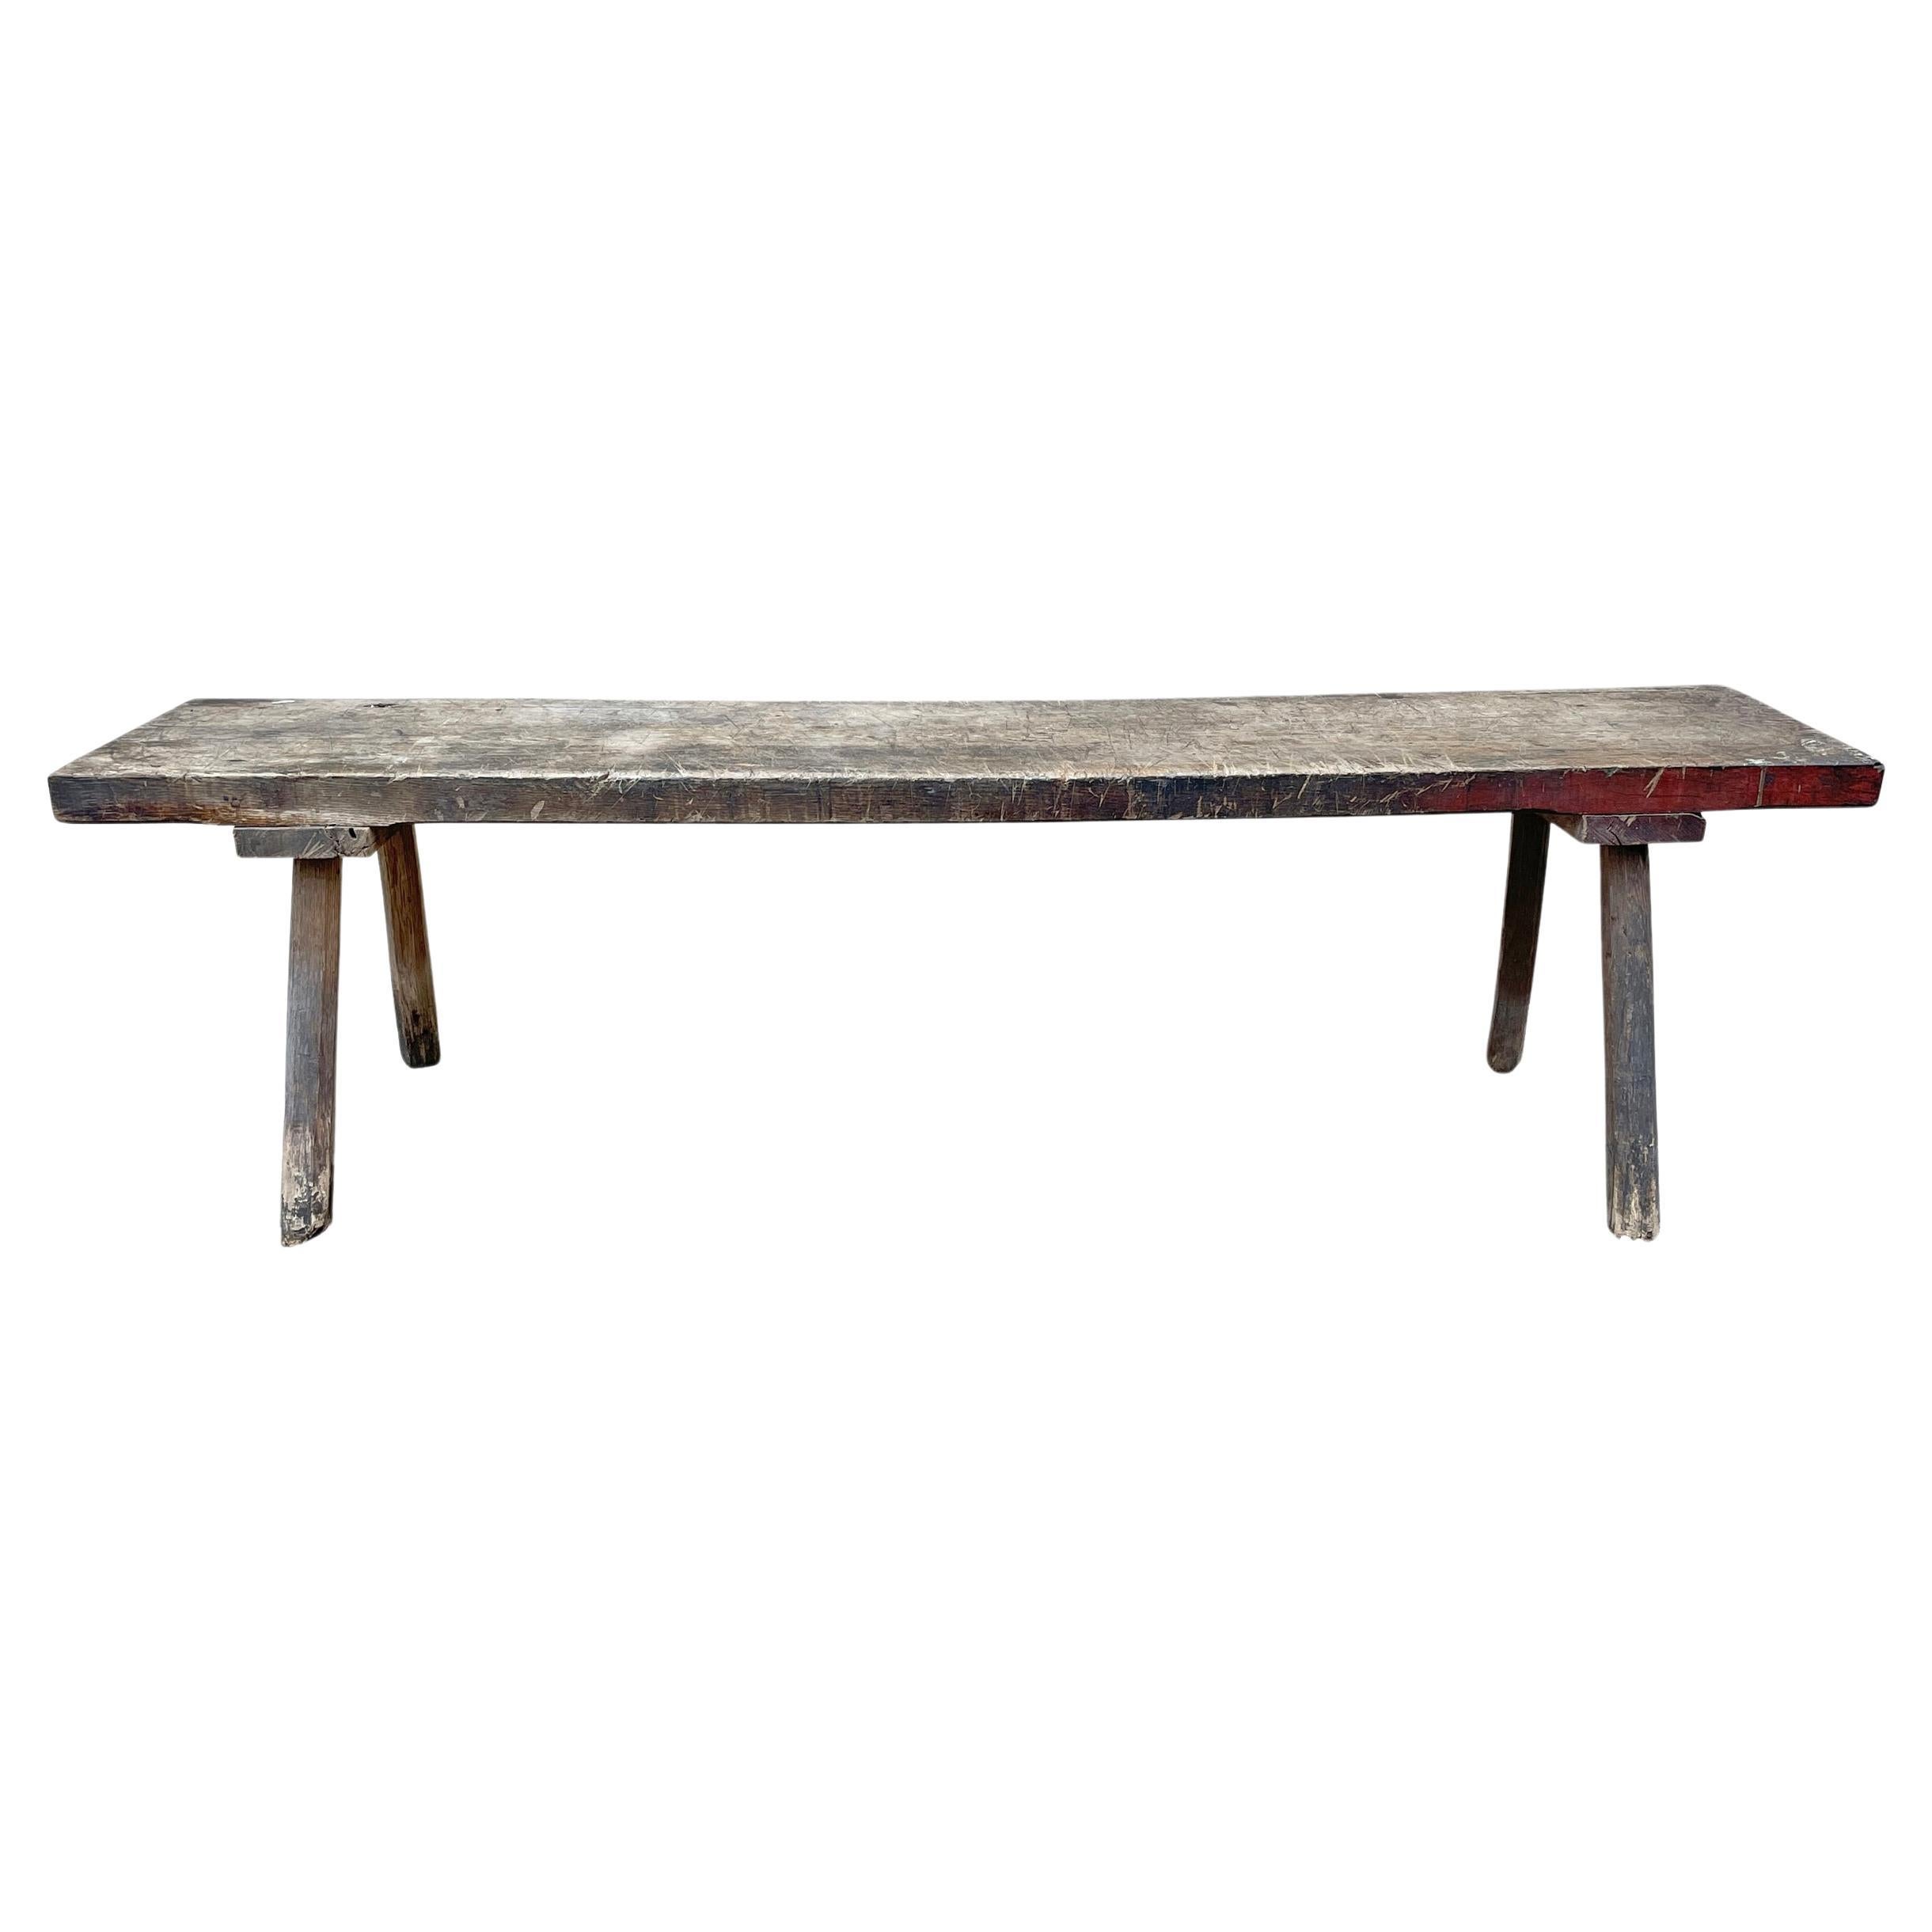 19th Century French Primitive Low Table For Sale